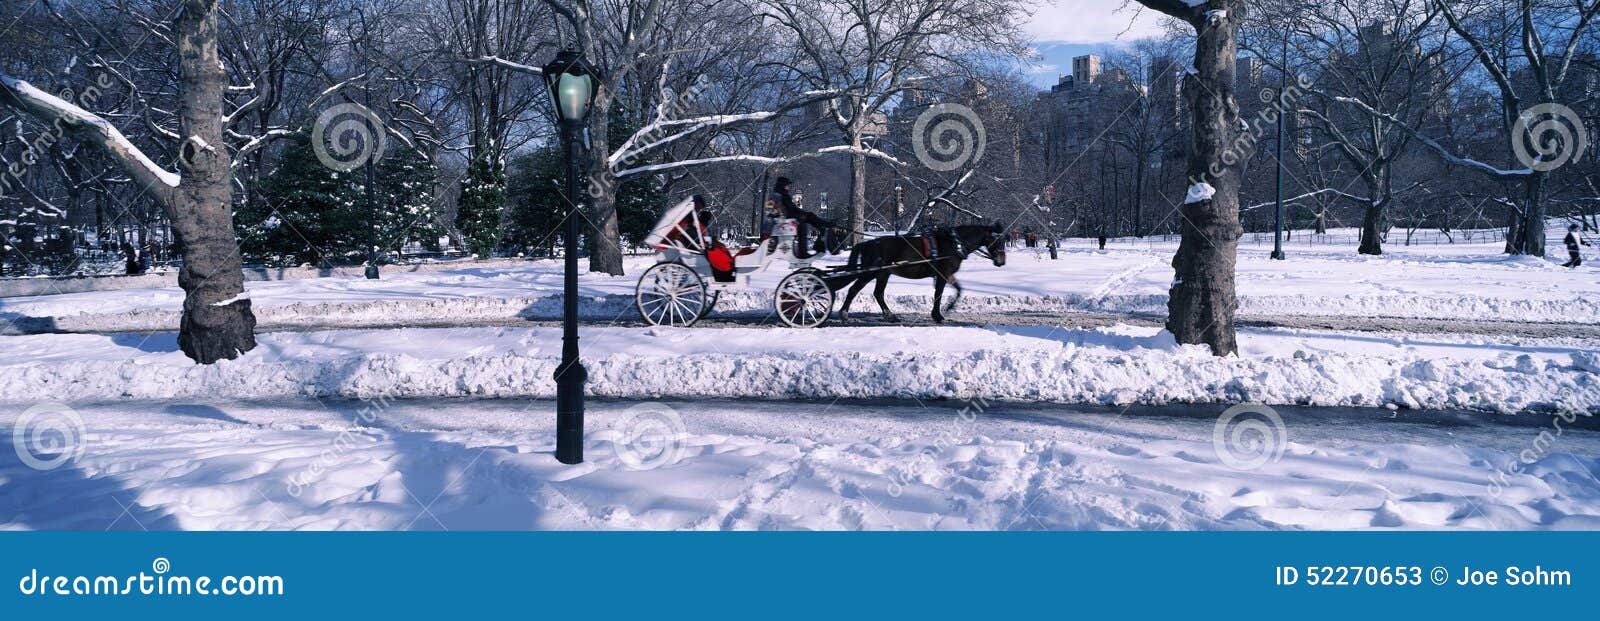 panoramic view of snowy city street lamps, horse and carriage in central park, manhattan, new york city, ny on a sunny winter day